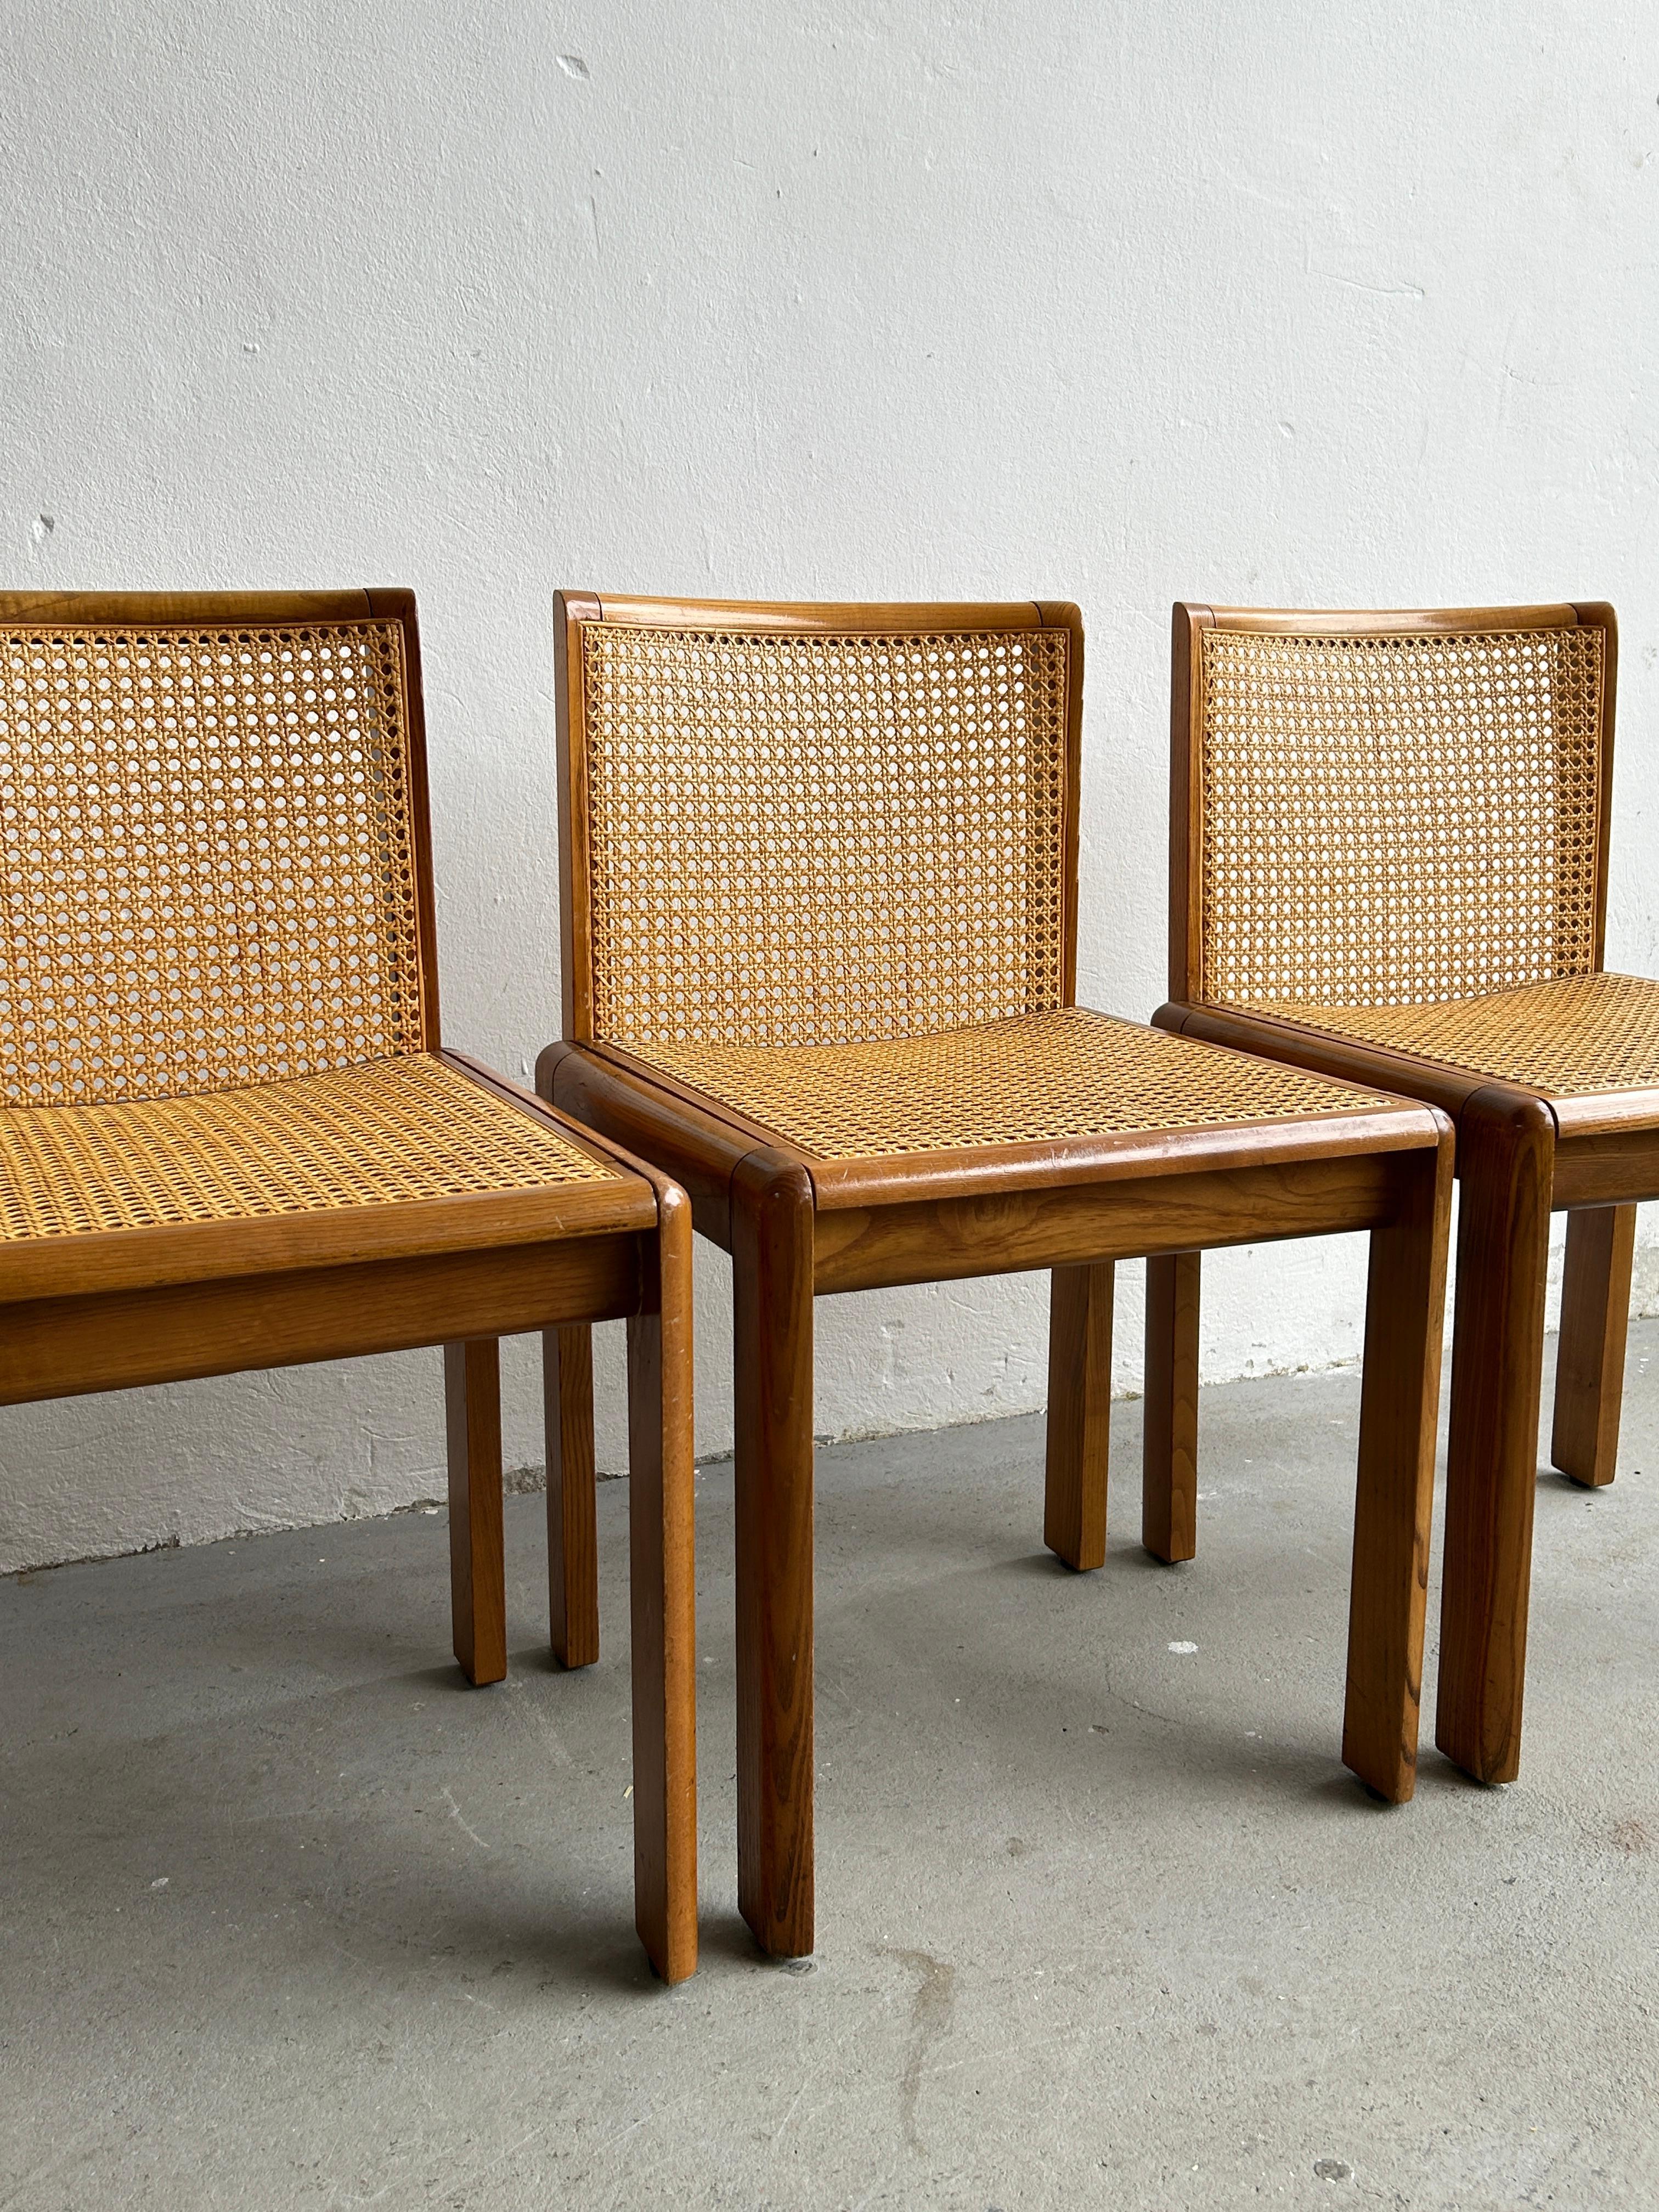 Vintage Italian 1970s Mid-Century Modern Wooden Dining Chairs in Oak and Cane 3